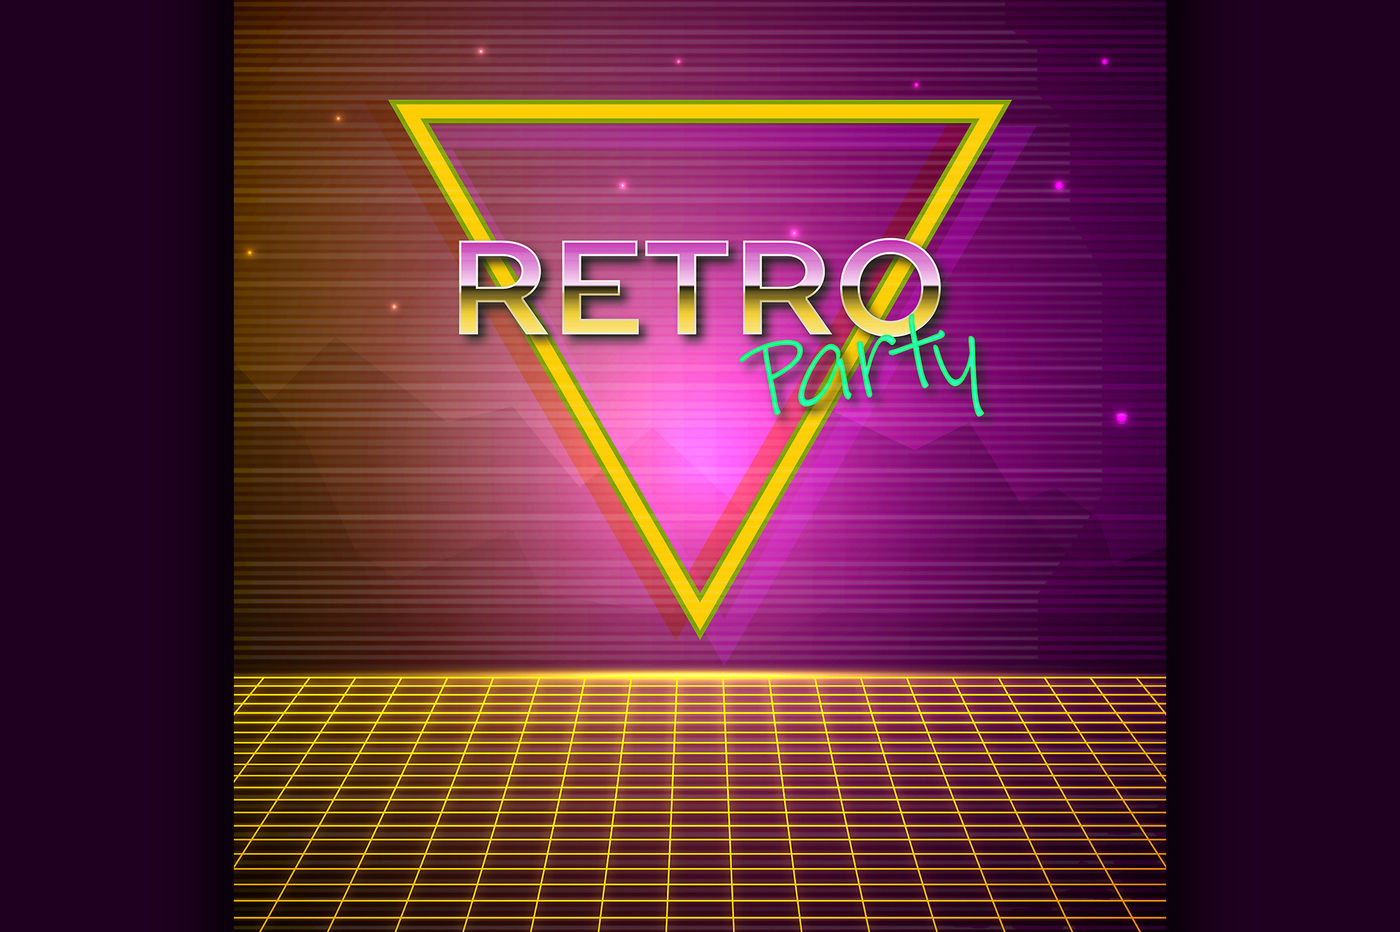 Futuristic Background 80s Style Retro Party By Netkoff Thehungryjpeg Com